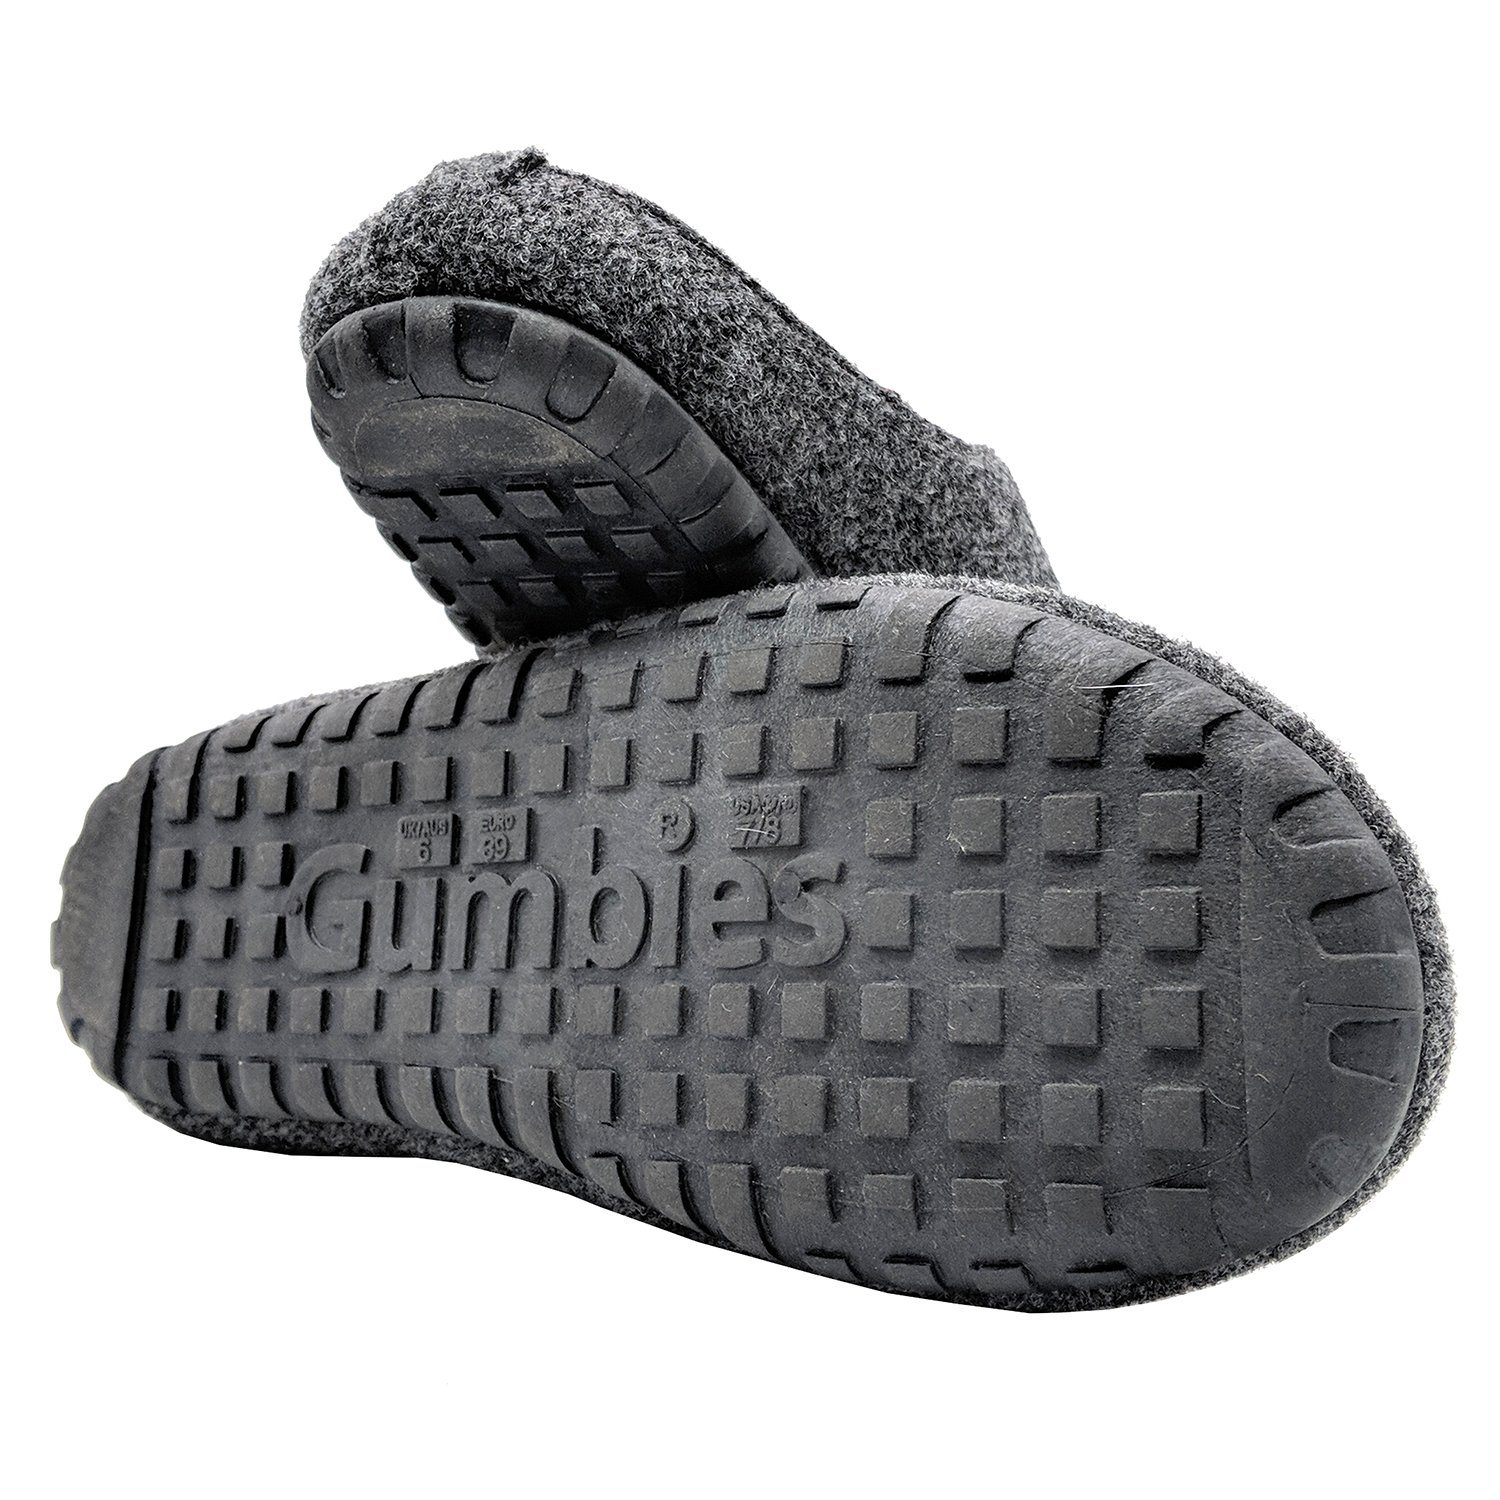 Gumbies Outback Hausschuh in aus Turquoise Charcoal recycelten Slipper »in Designs« Materialien farbenfrohen charcoal-turquoise